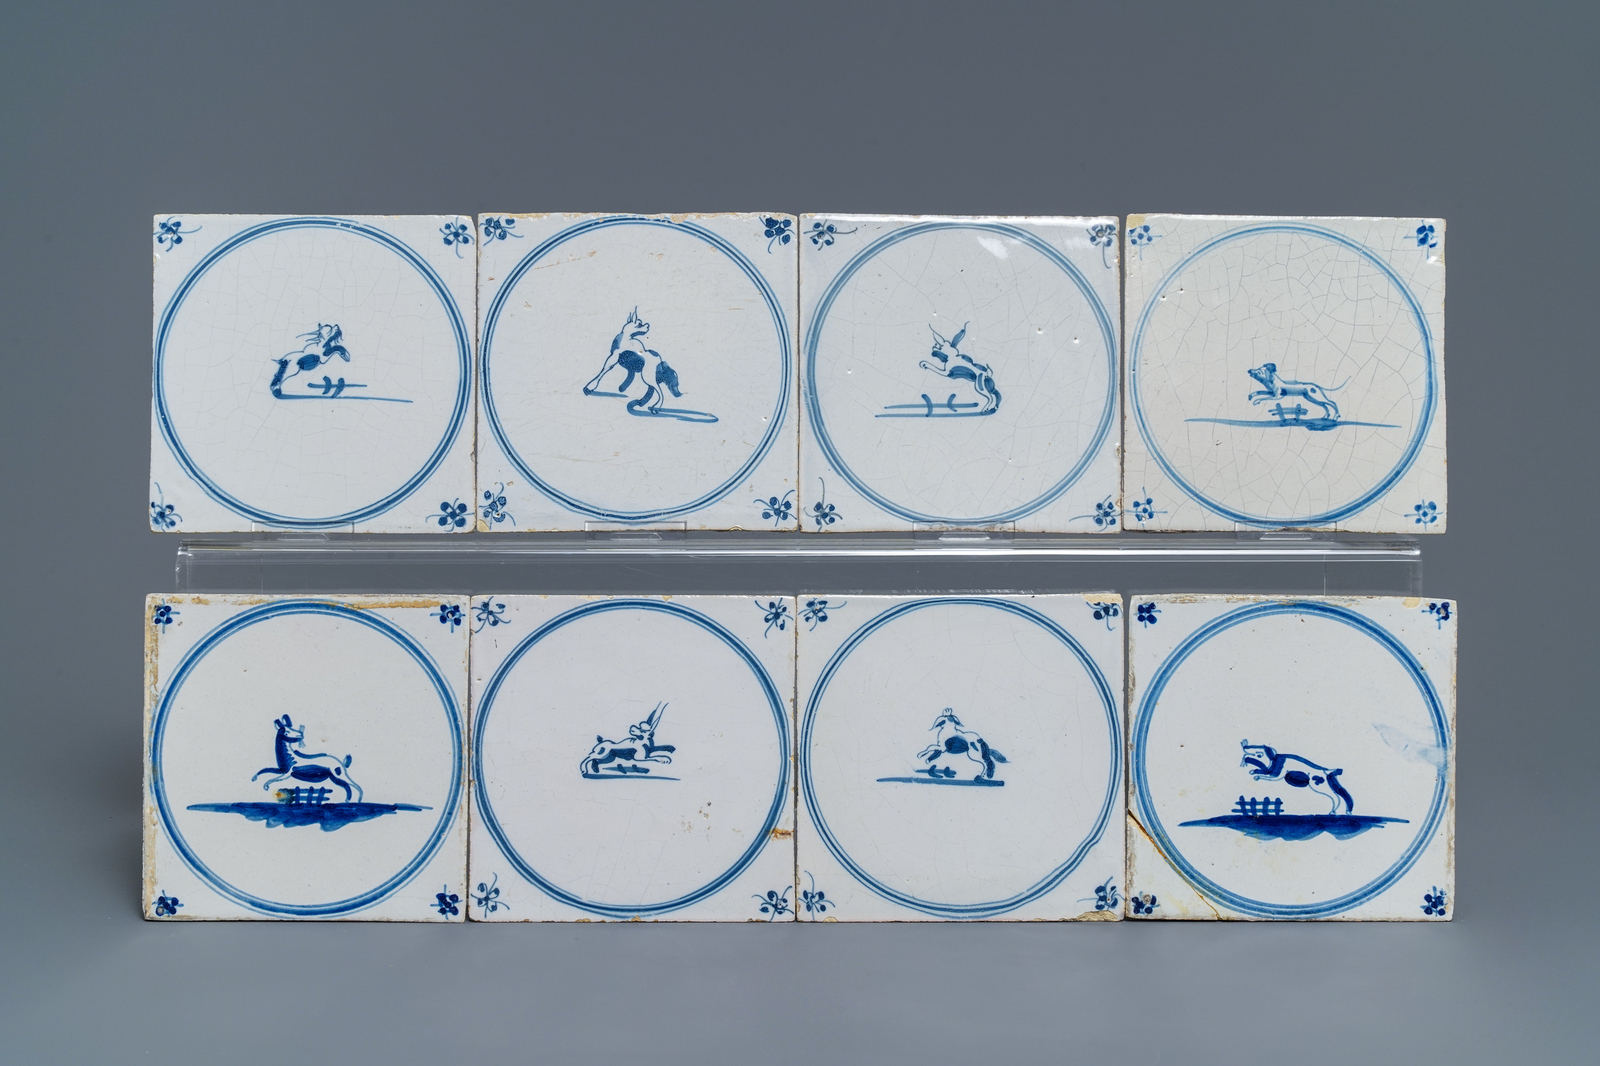 54 Dutch Delft blue and white 'animal' tiles, 18/19th C. - Image 5 of 8